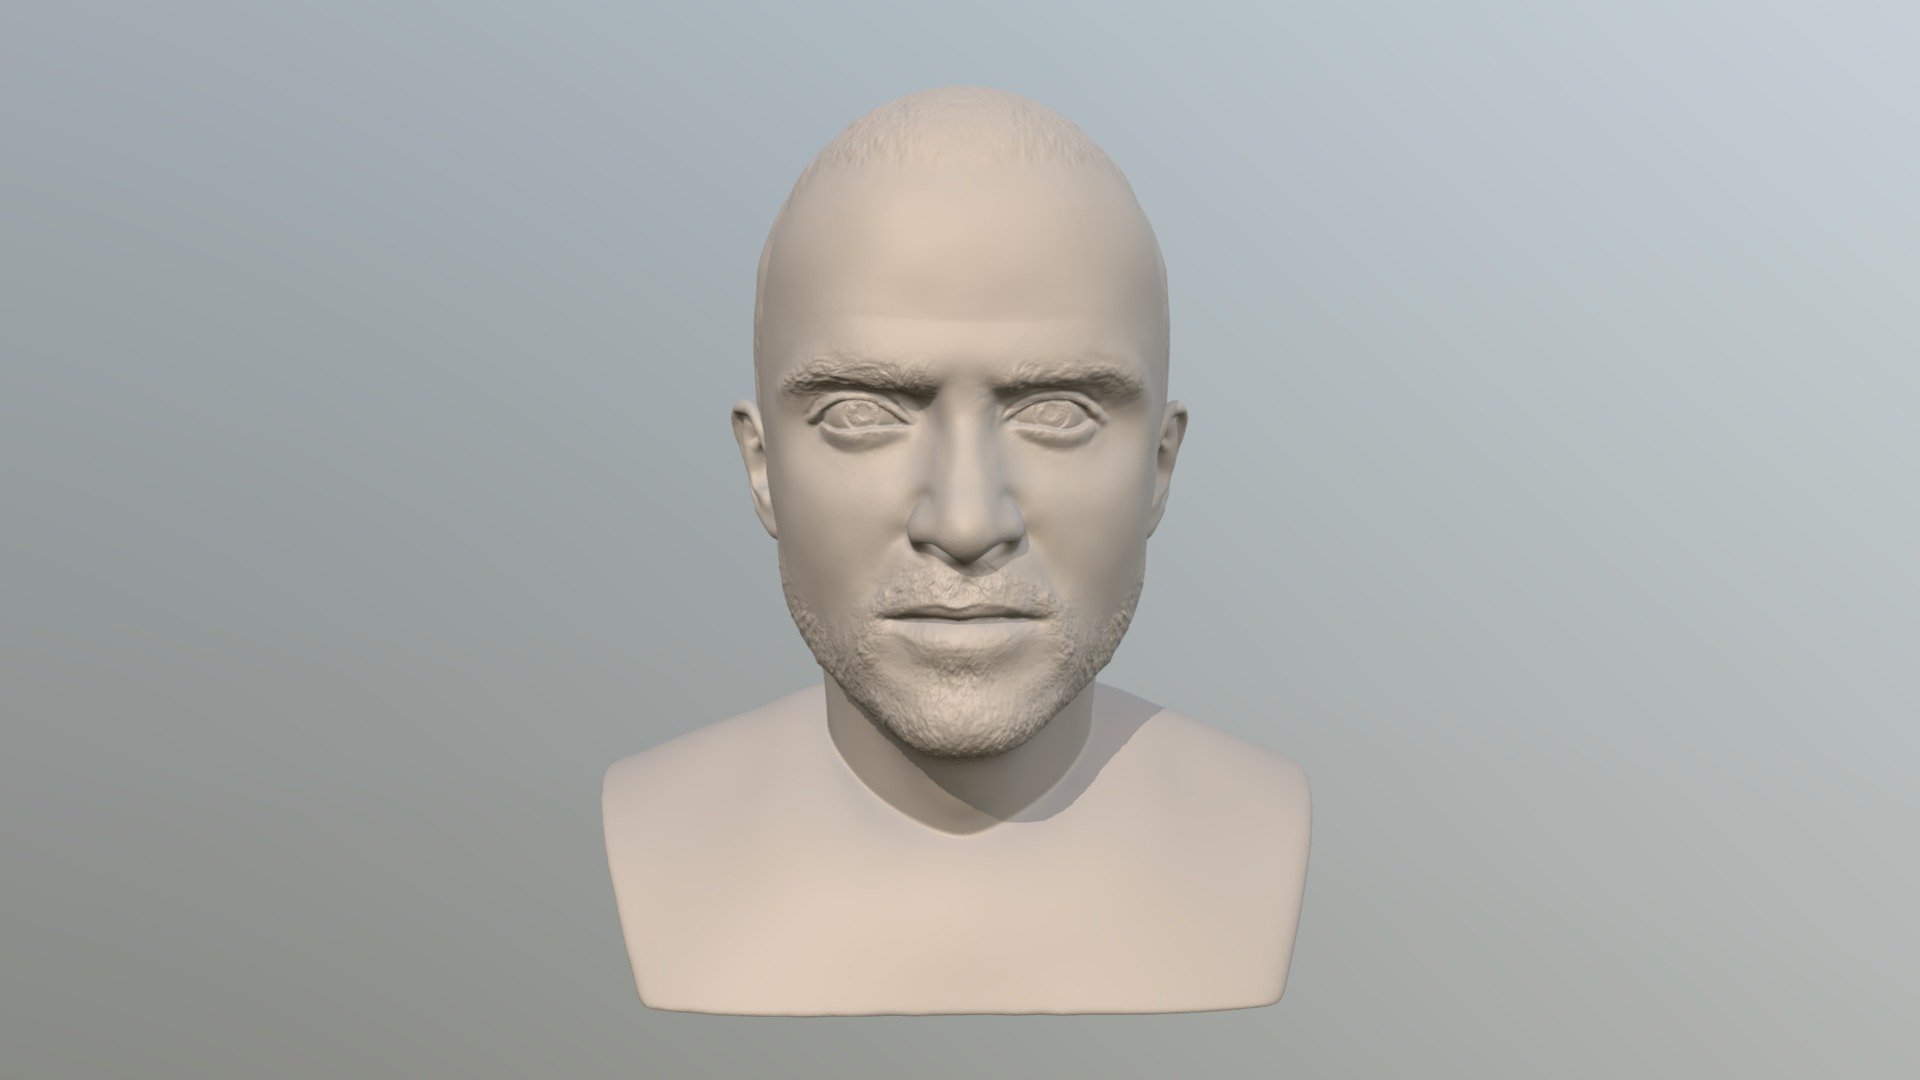 Here is Jesse Pinkman (Aaron Paul) from Breaking Bad bust 3D model ready for 3D printing. The model current size is 5 cm height, but you are free to scale it. 
Zip file contains stl. 
The model was created in ZBrush 3d model